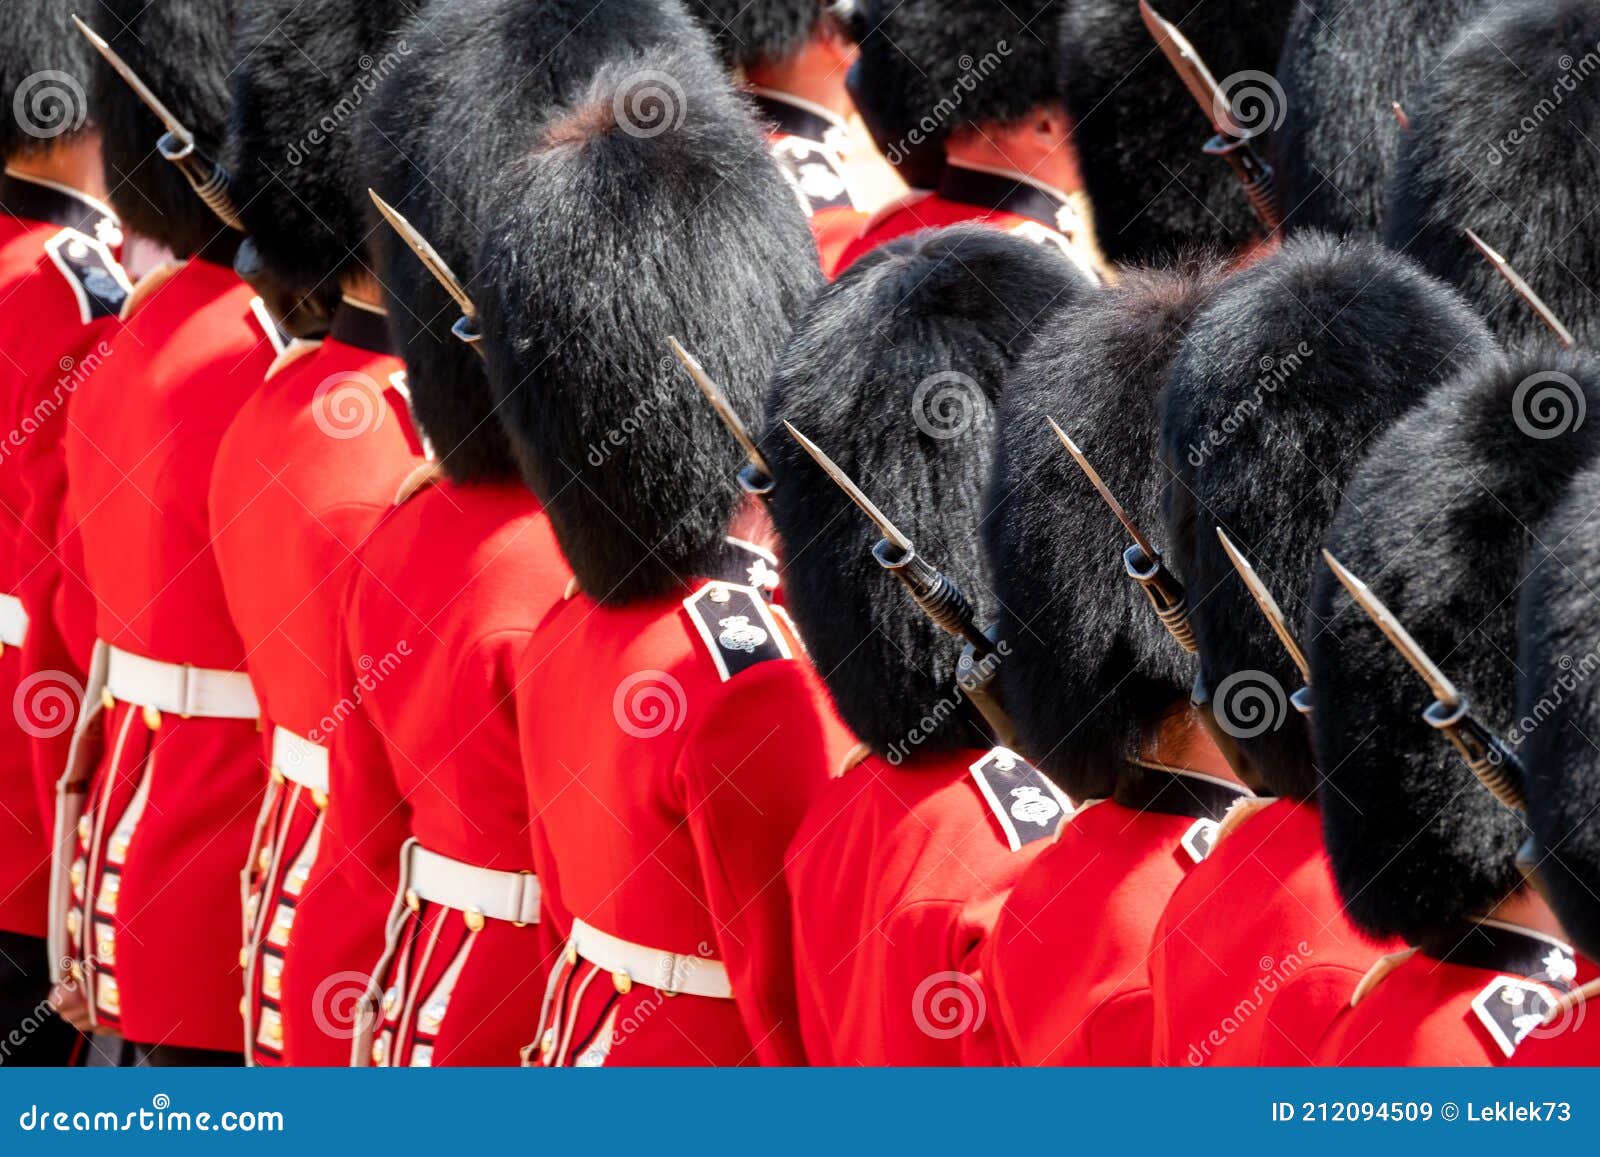 trooping the colour, annual military ceremony in london in the presence of the queen. guards wear bearskin hats.